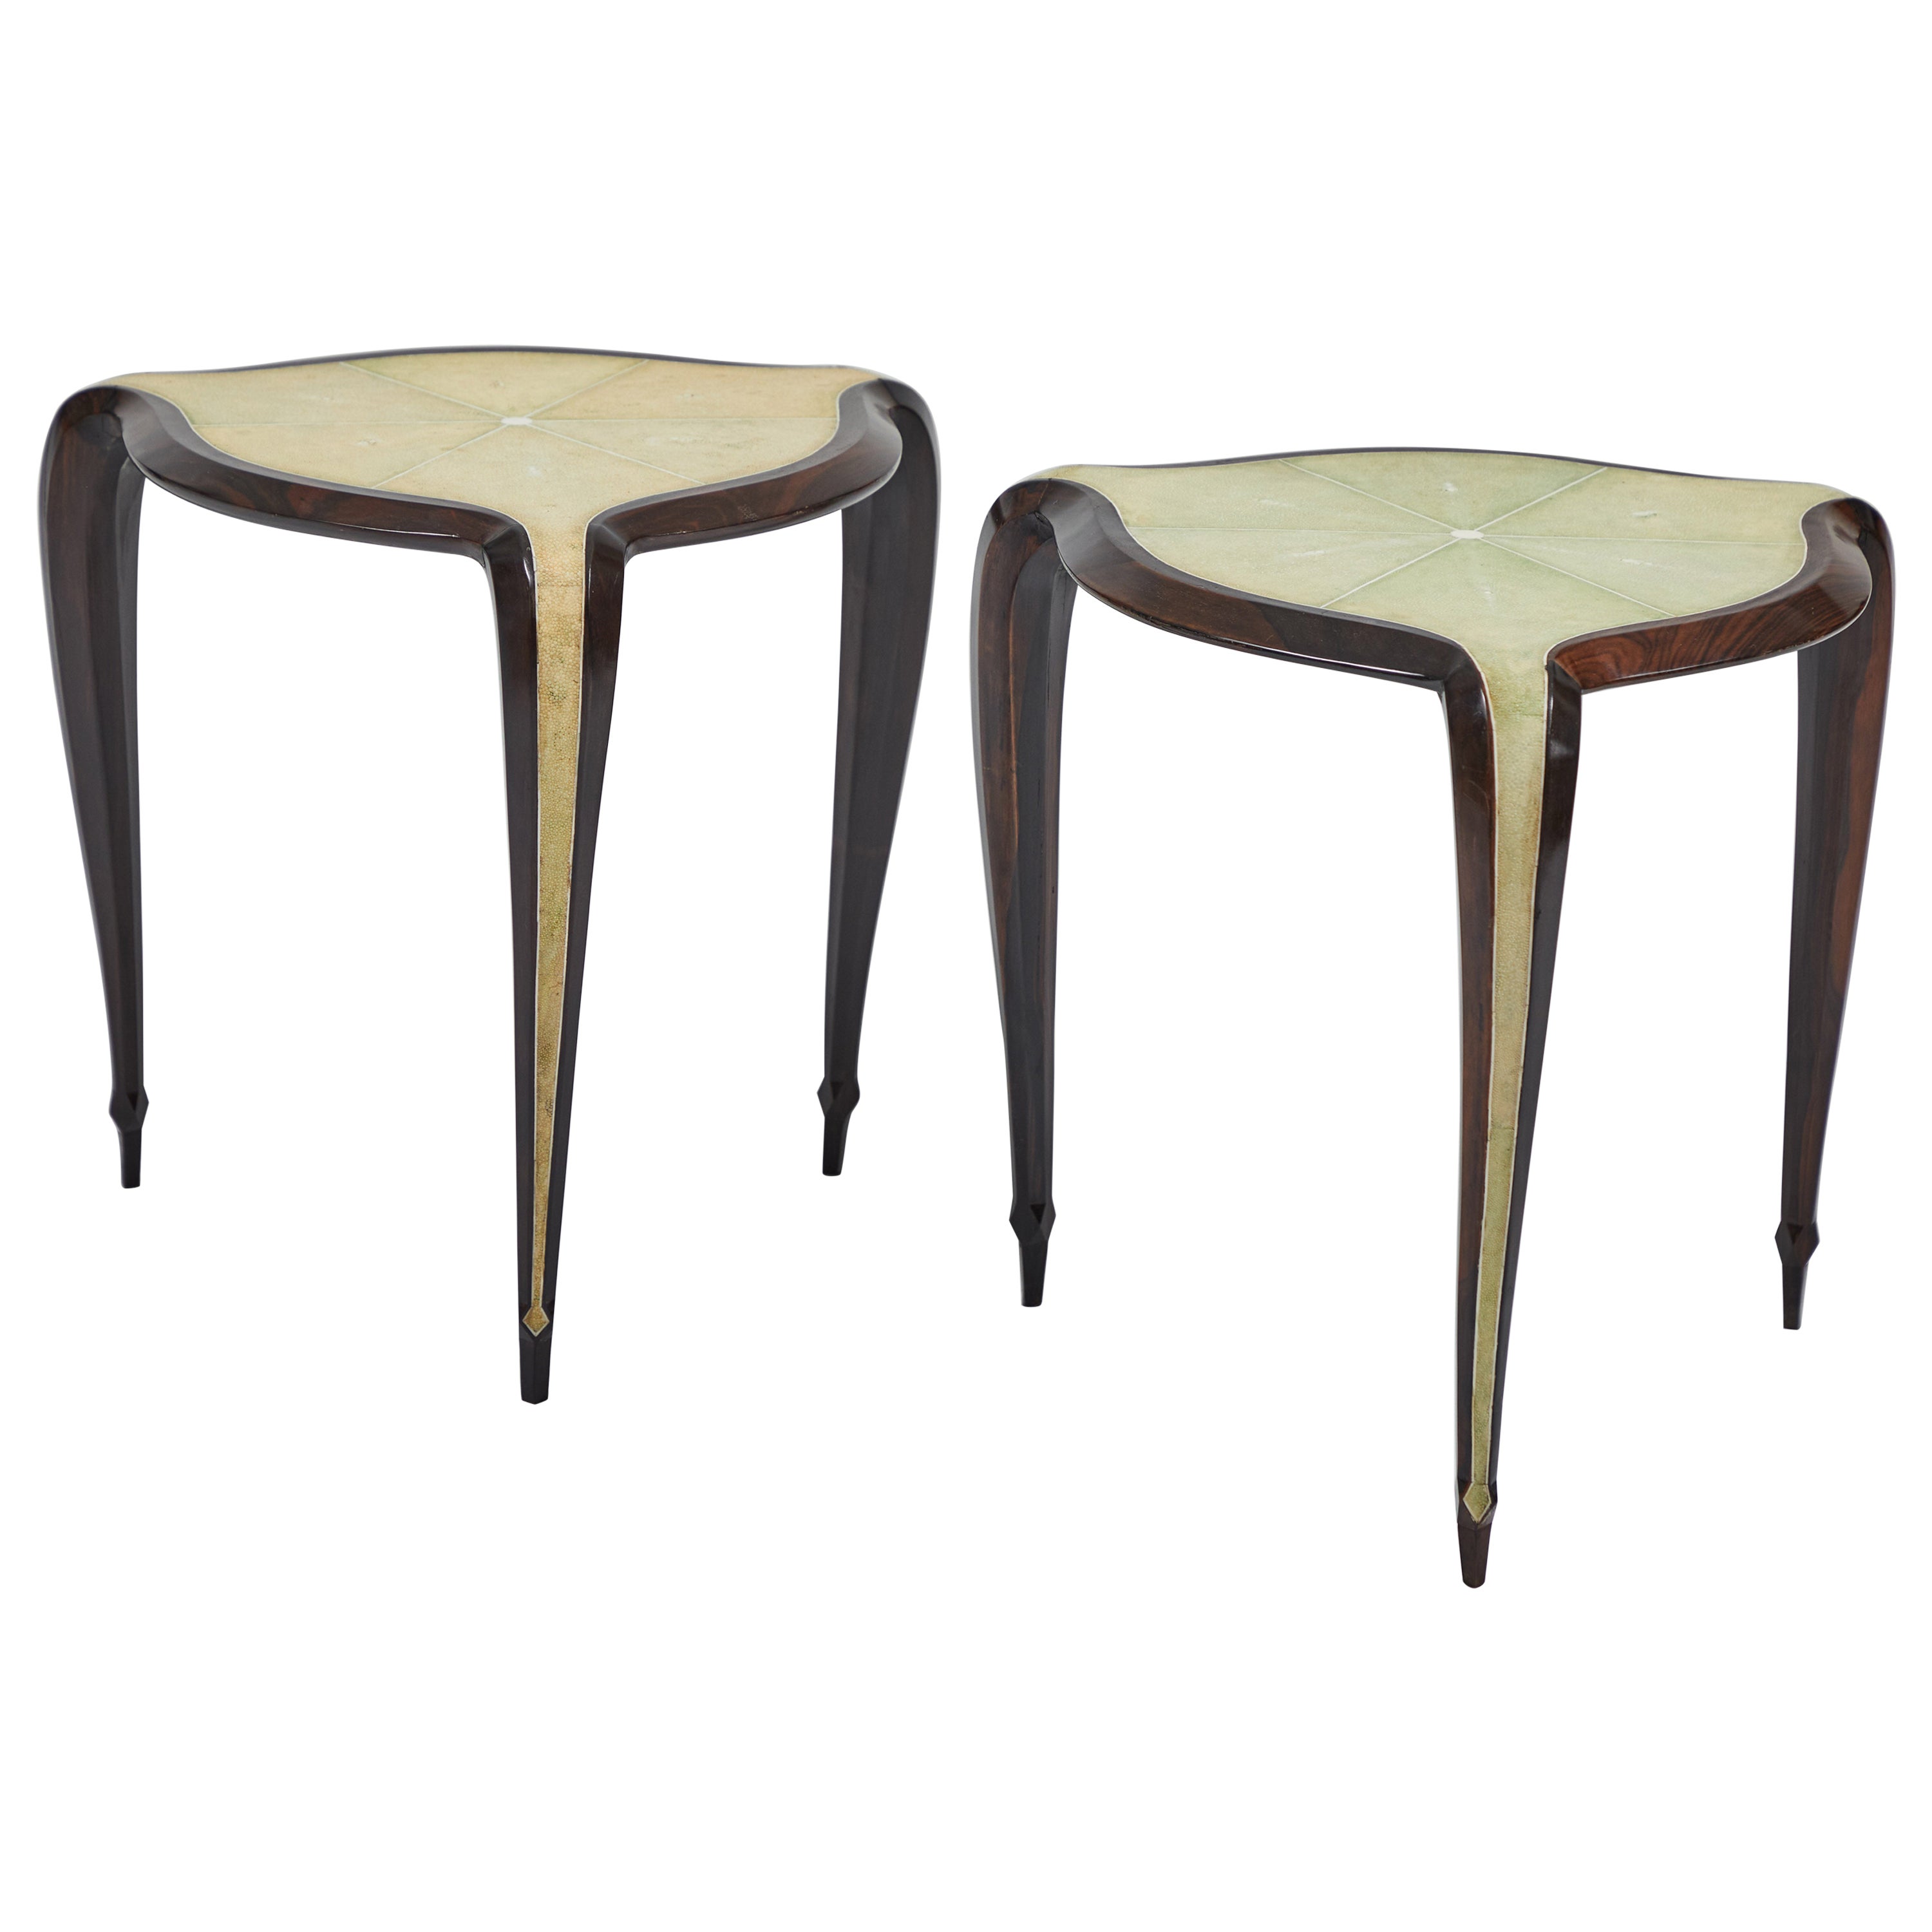 Pair of Shagreen and Rosewood Side Tables after Clement Rousseau